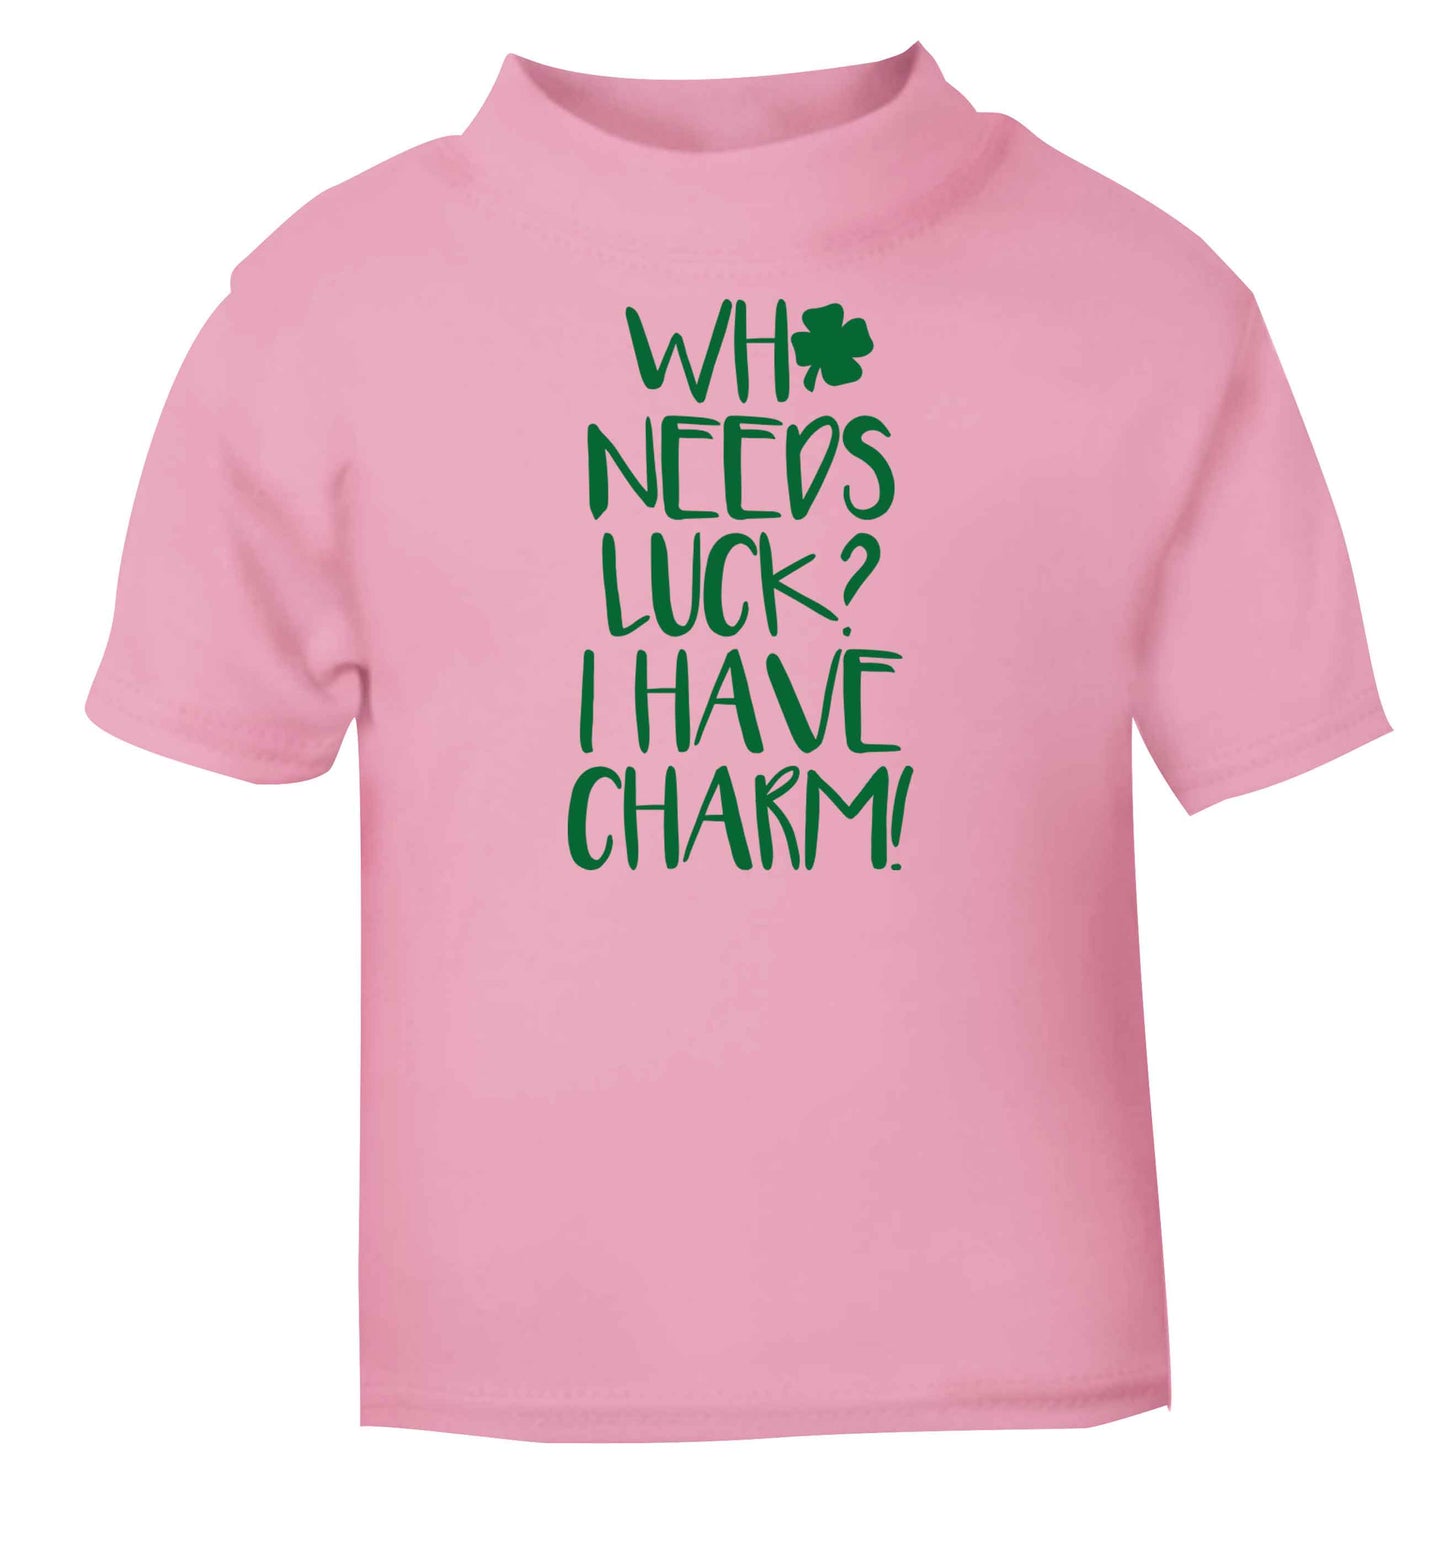 Who needs luck? I have charm! light pink baby toddler Tshirt 2 Years